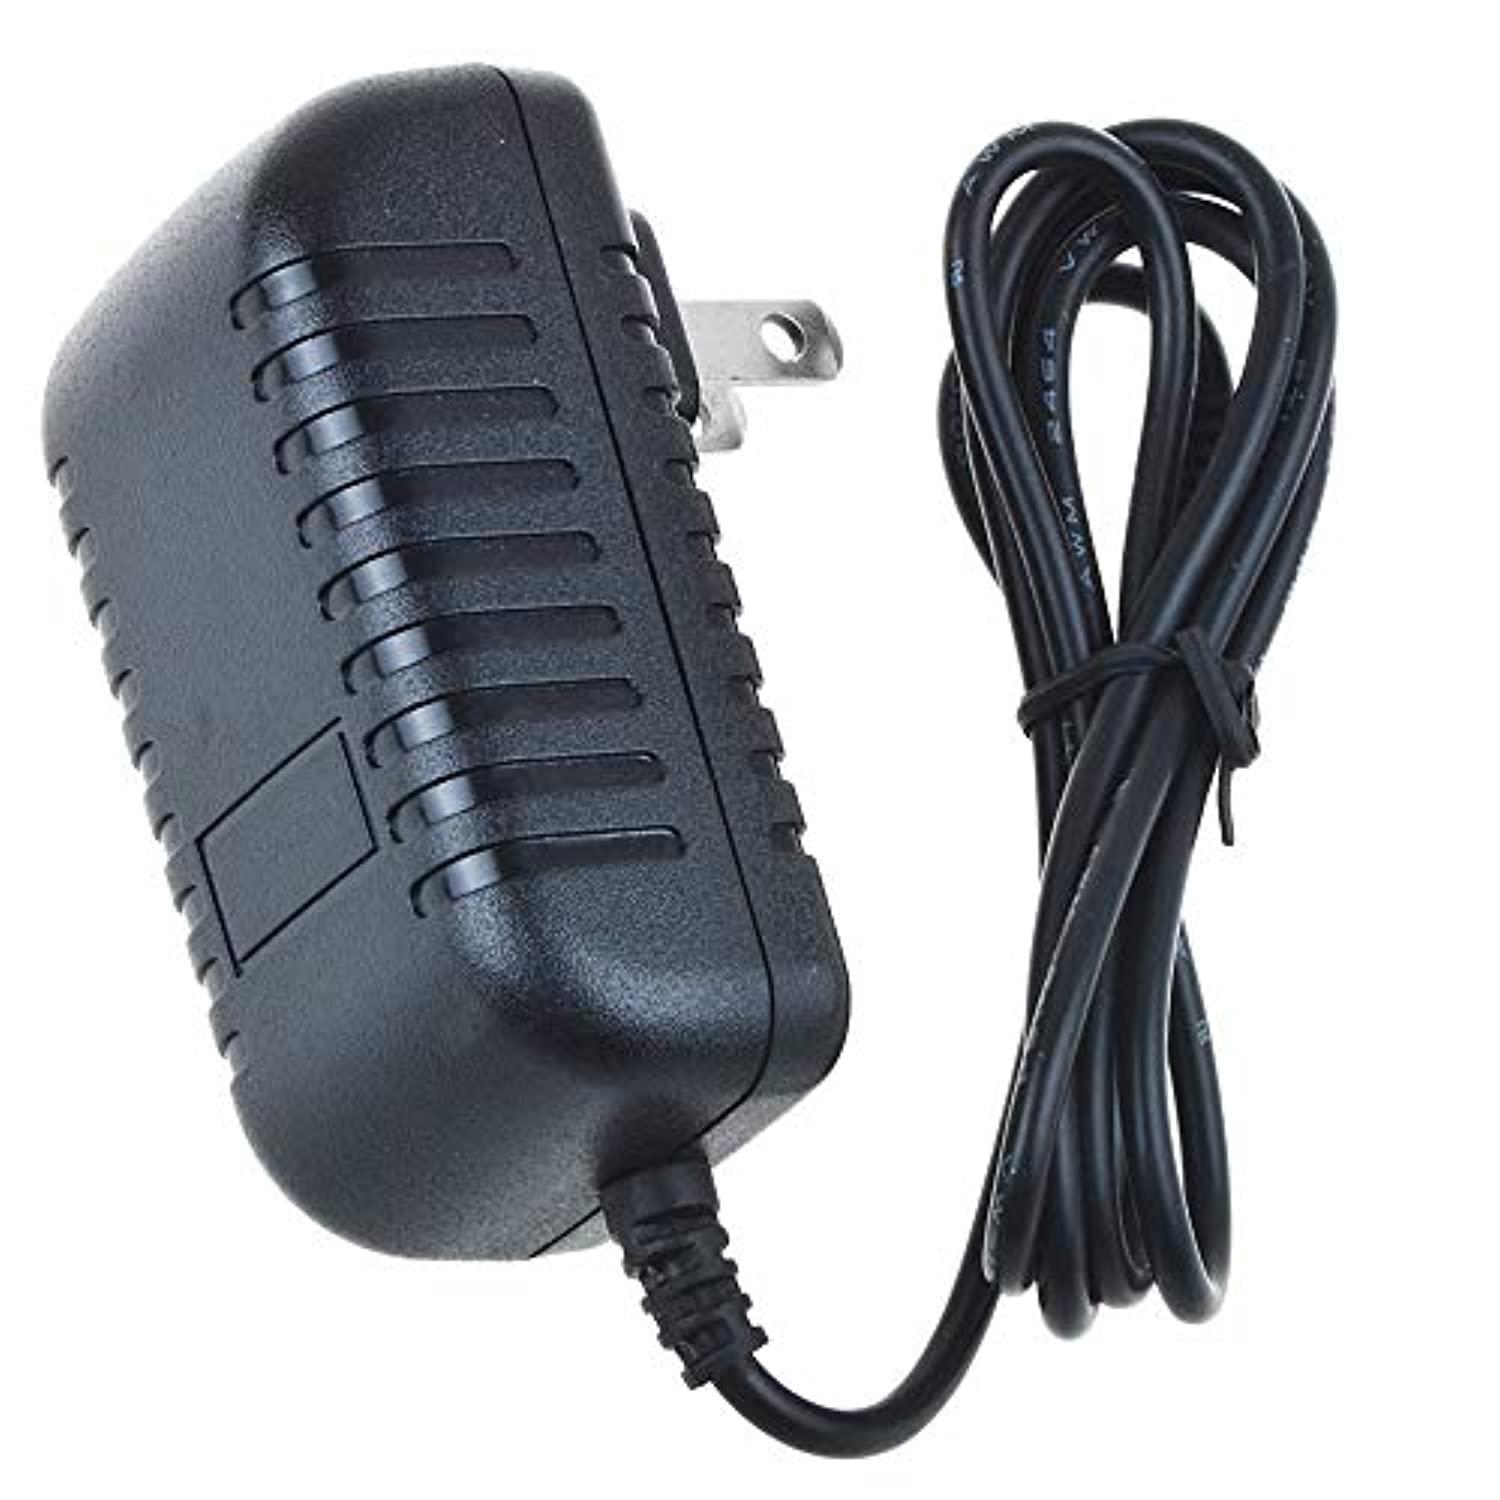 digipartspower ac dc adapter for obi202 voip phone router 2-phone ports obi110 voice service